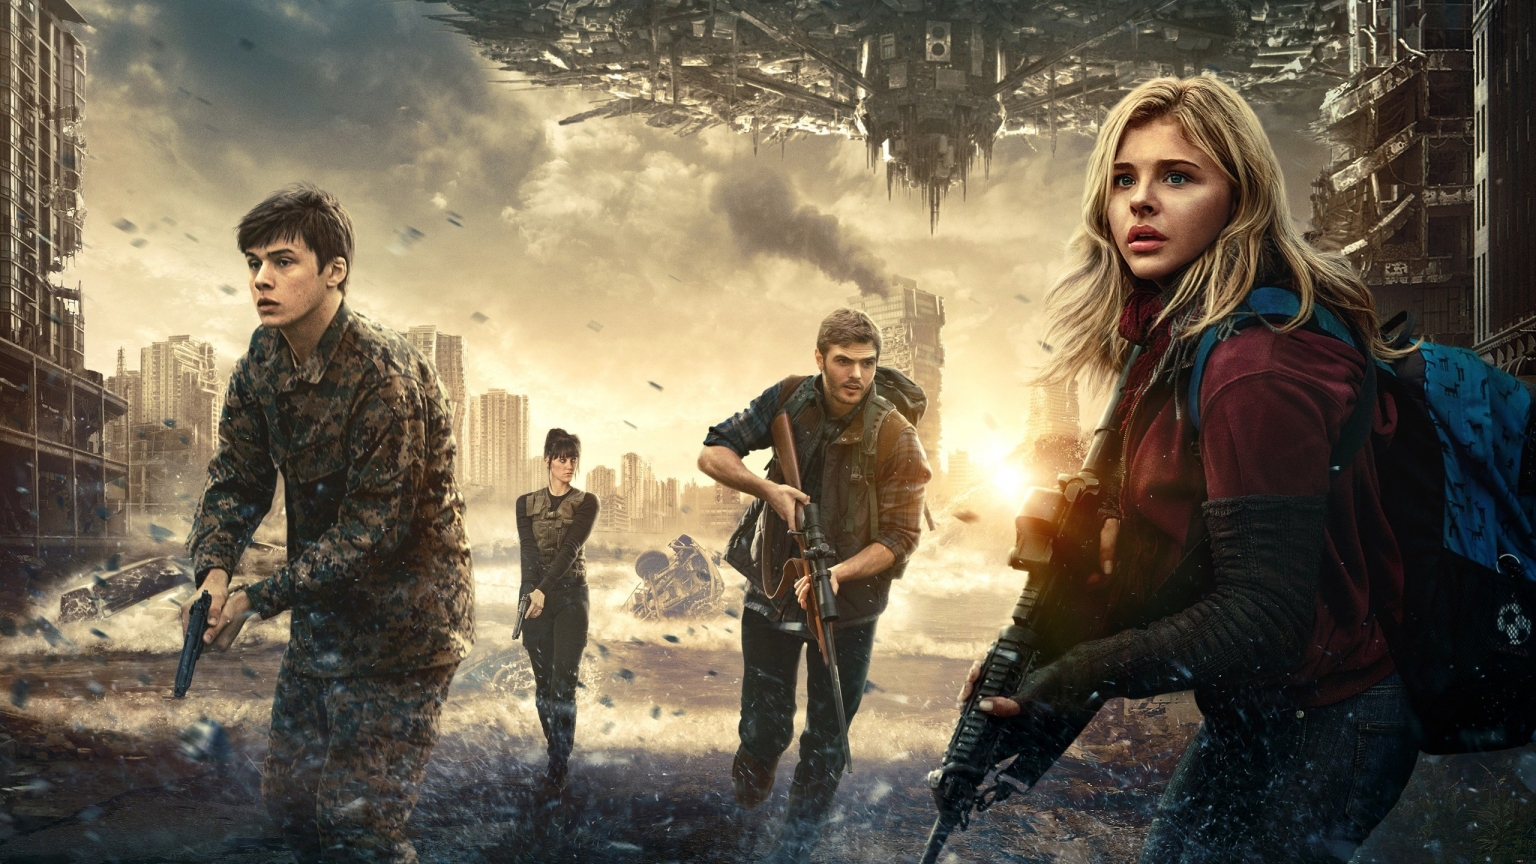 The 5th Wave Film 2016 for 1536 x 864 HDTV resolution